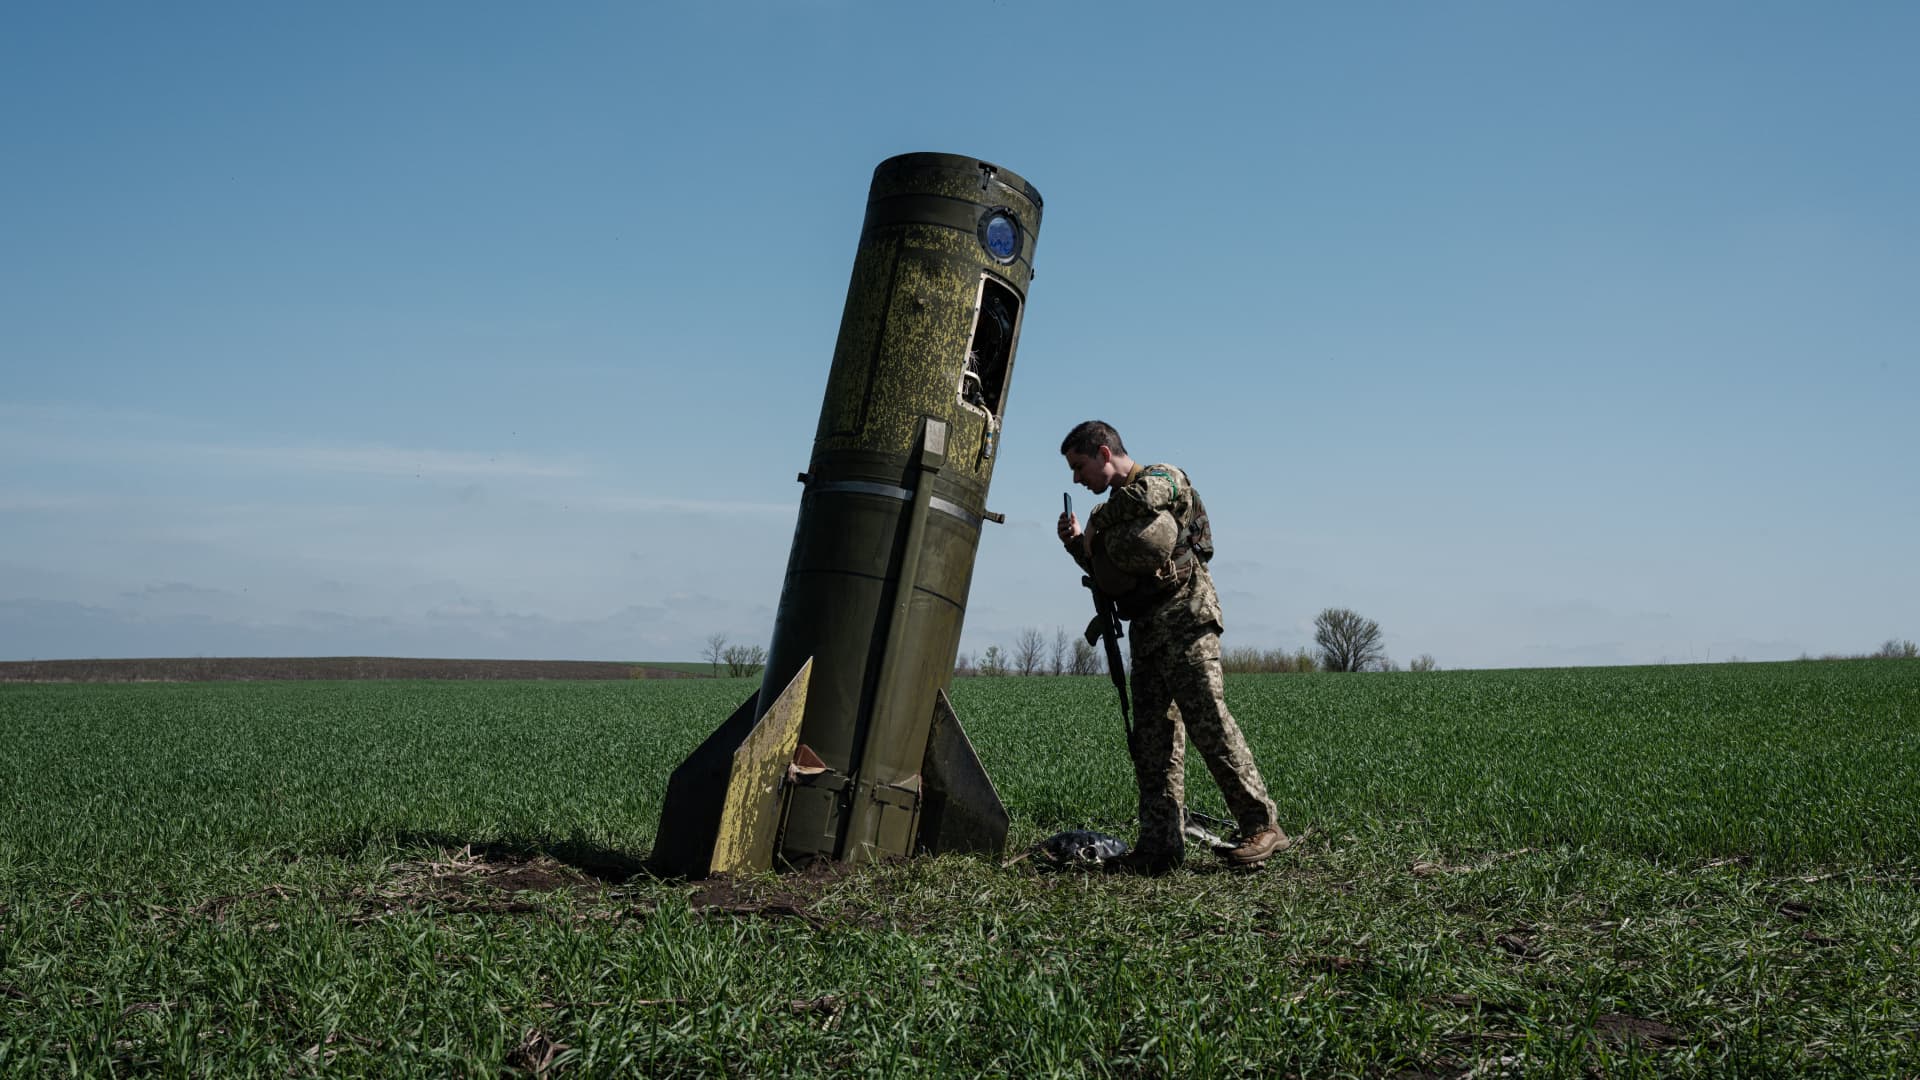 A Ukrainian serviceman looks at a Russian ballistic missile's booster stage that fell in a field in Bohodarove, eastern Ukraine, on April 25, 2022, amid the Russian invasion of Ukraine.